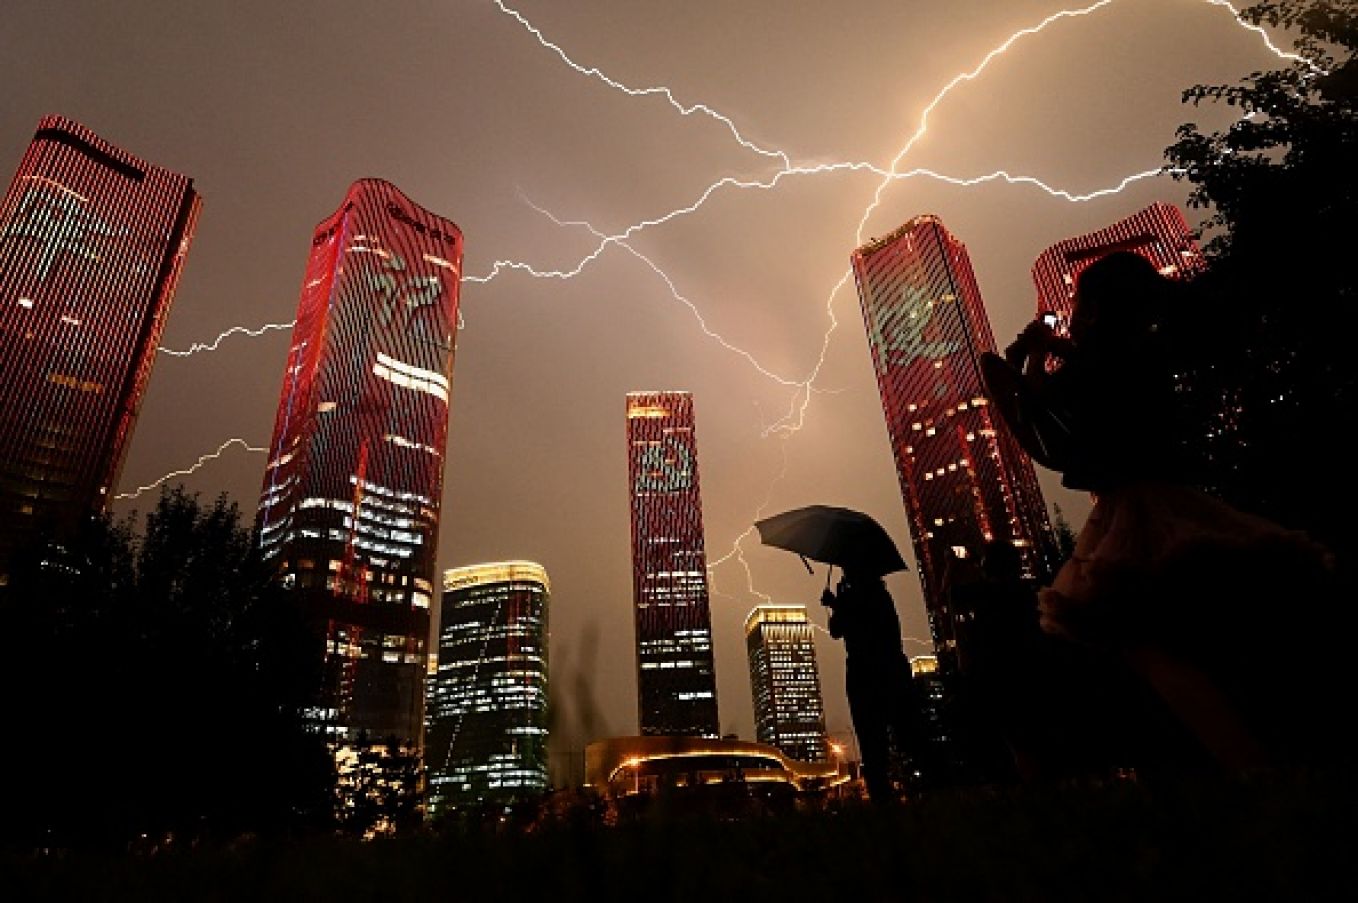 A Bolt Of Lightning Crosses The Sky As People Look At Buildings Displaying A Light Show On The Eve Of The 100Th Anniversary Of The Chinese Communist Party In Beijing. Photo: Noel Celis/Afp Via Getty Images